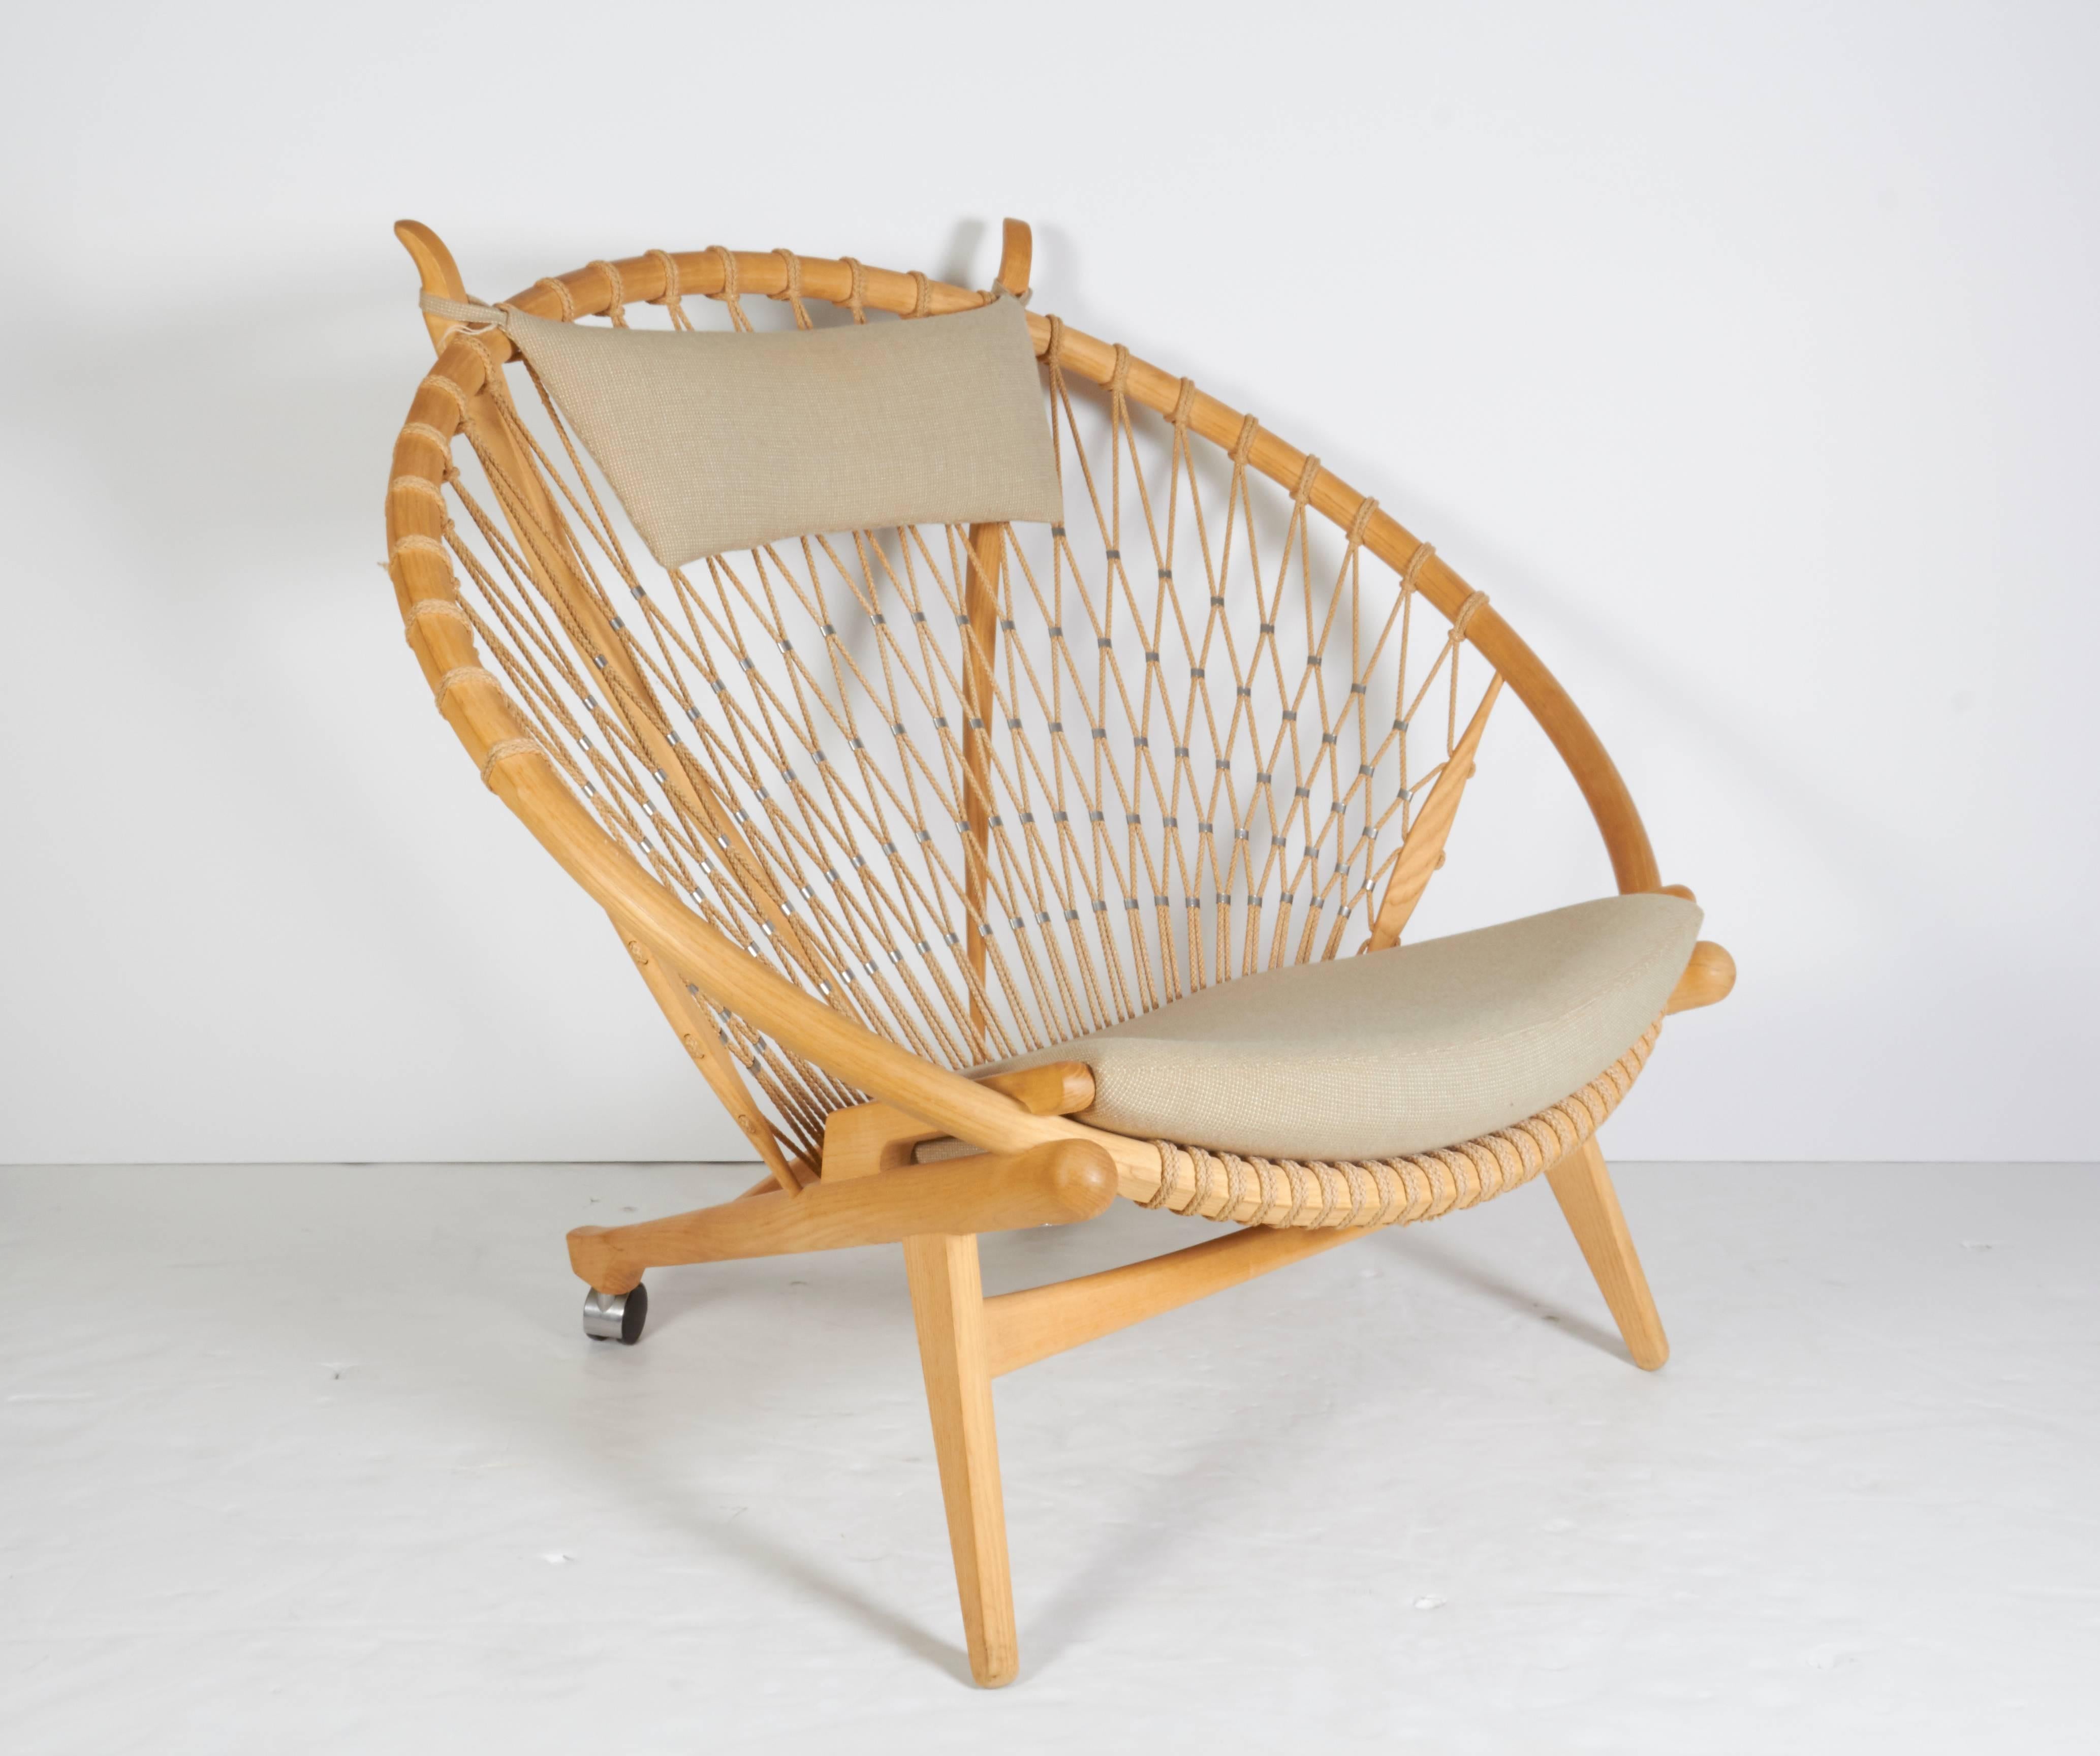 A radical Wegner design this lounge chair's seat and back are mounted with flag halyard and a loose seat cushion upholstered in wool with back legs on casters. Designed in 1985. Produced by PP Møbler.